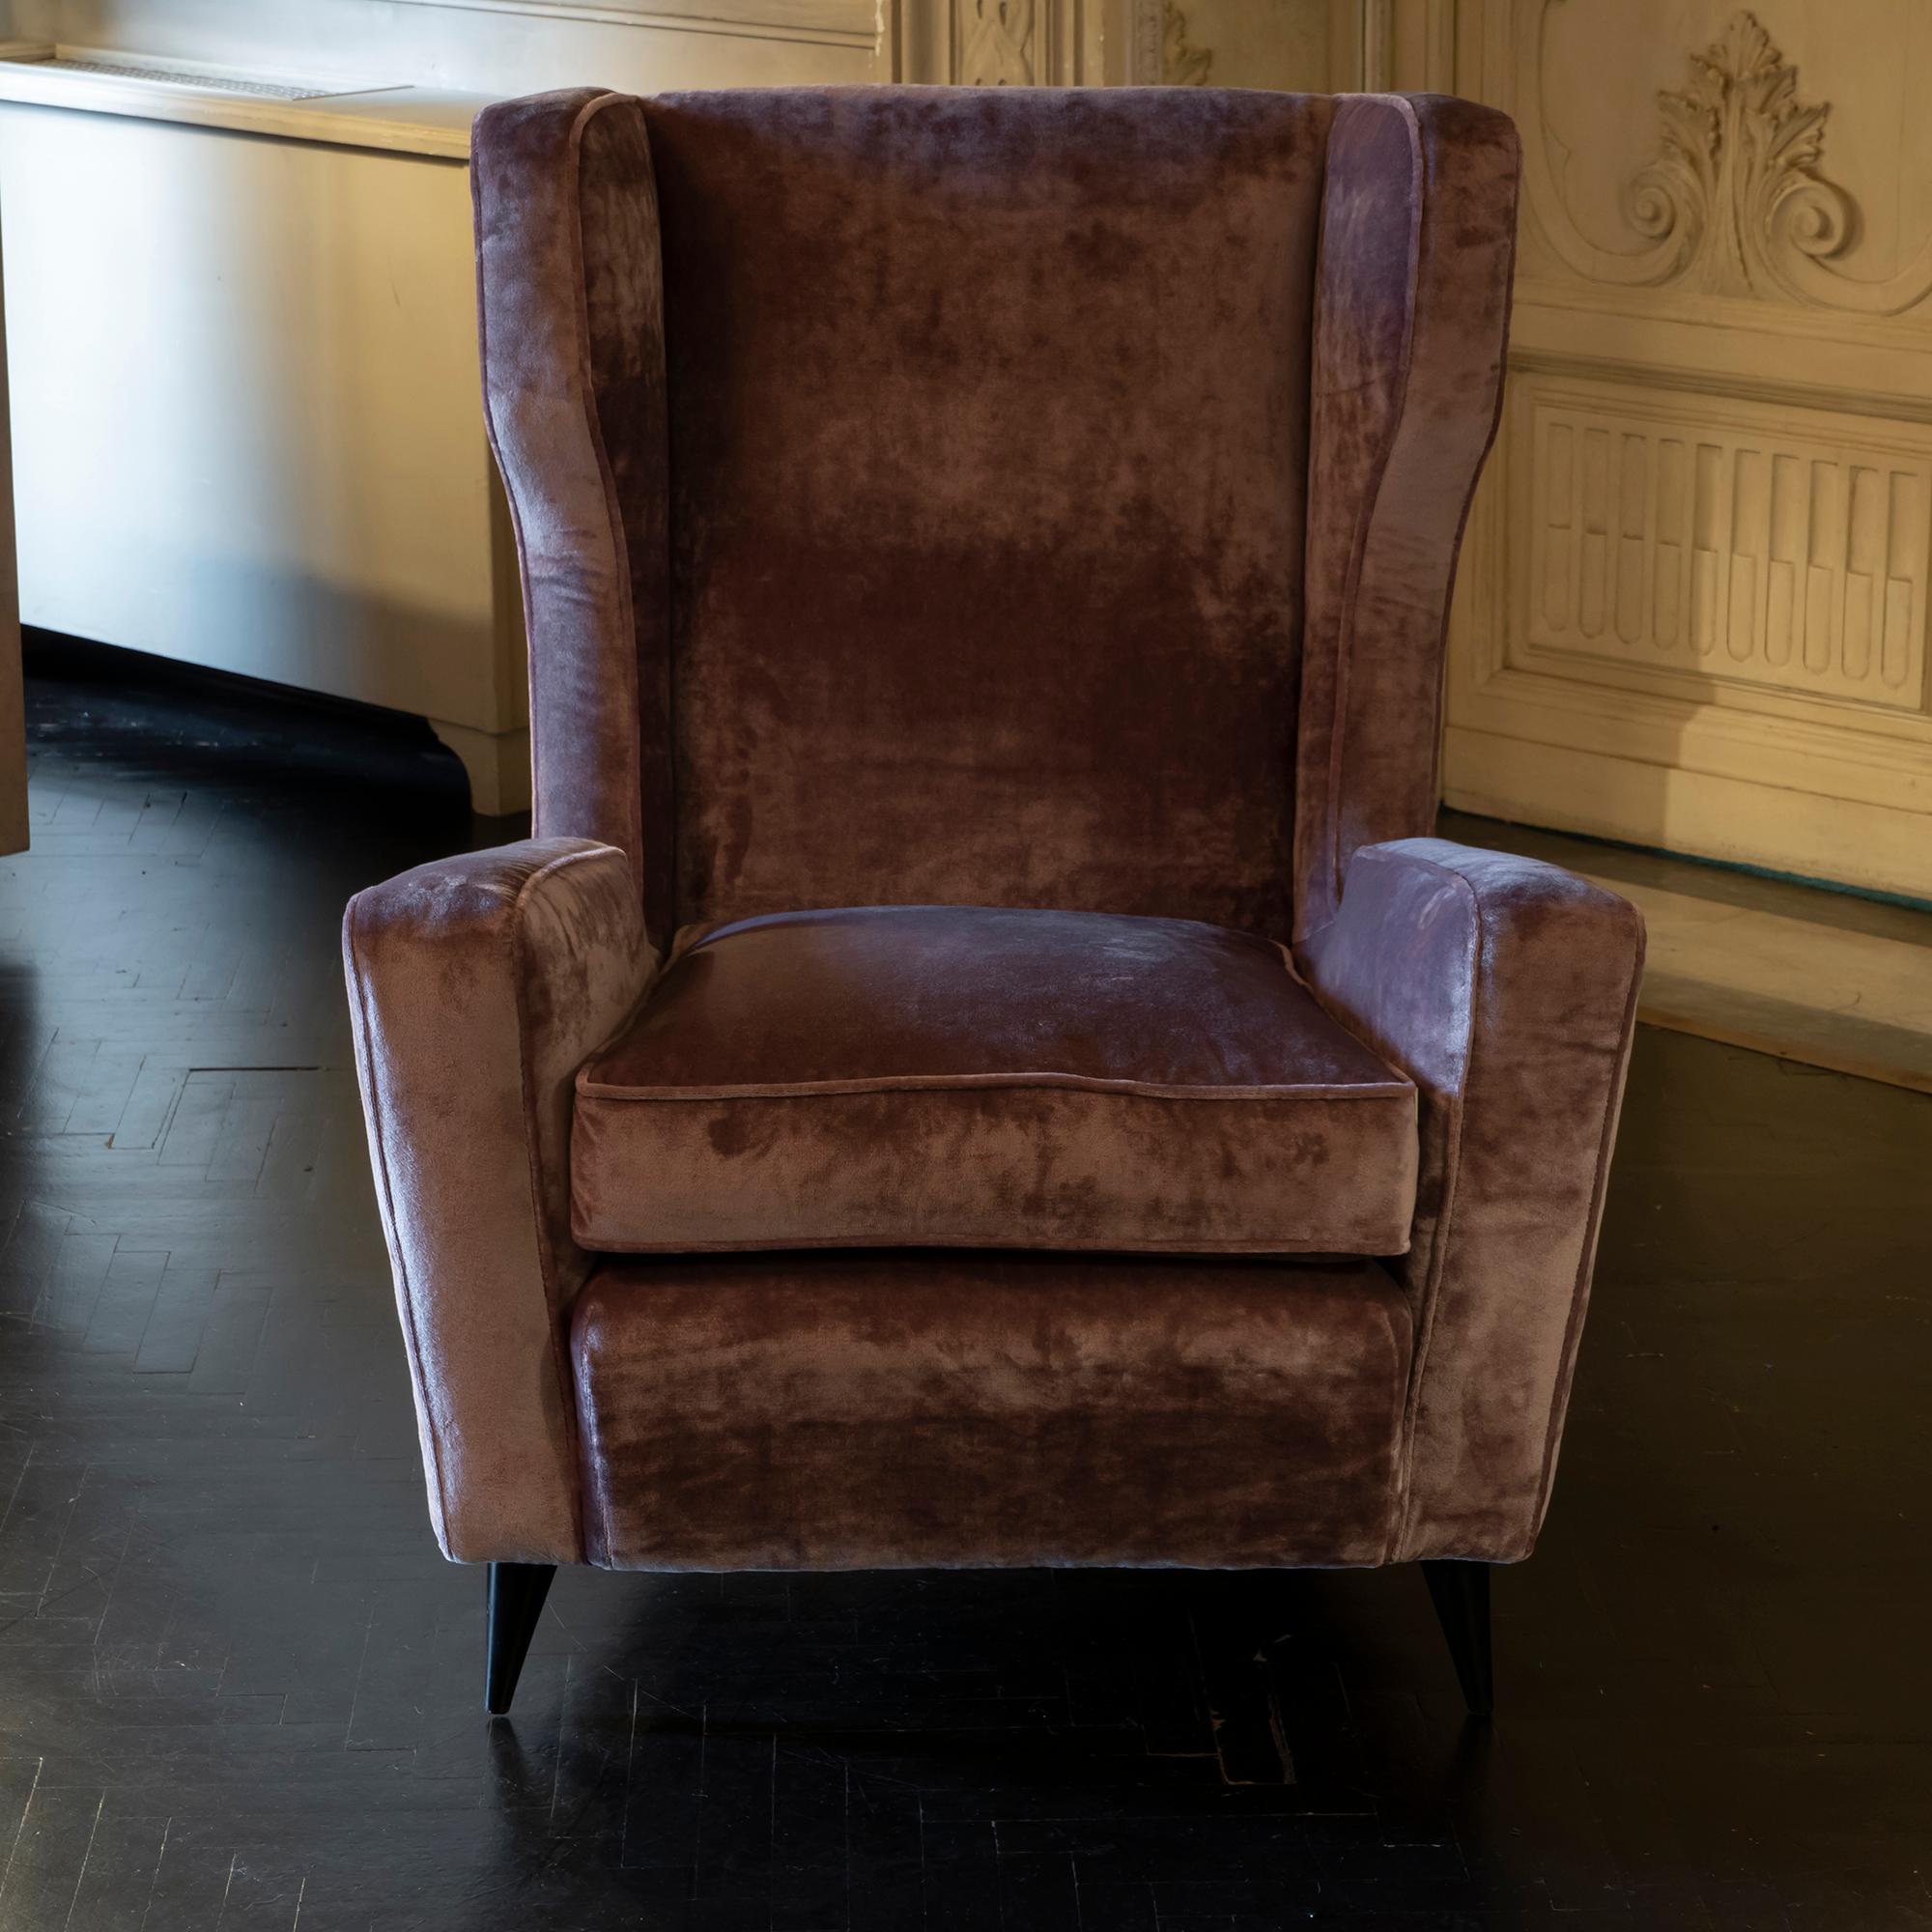 Pair of Melchiorre Bega armchairs newly reupholstered in mauve cotton/viscose velvet, original black walnut feet, Italy 1950.